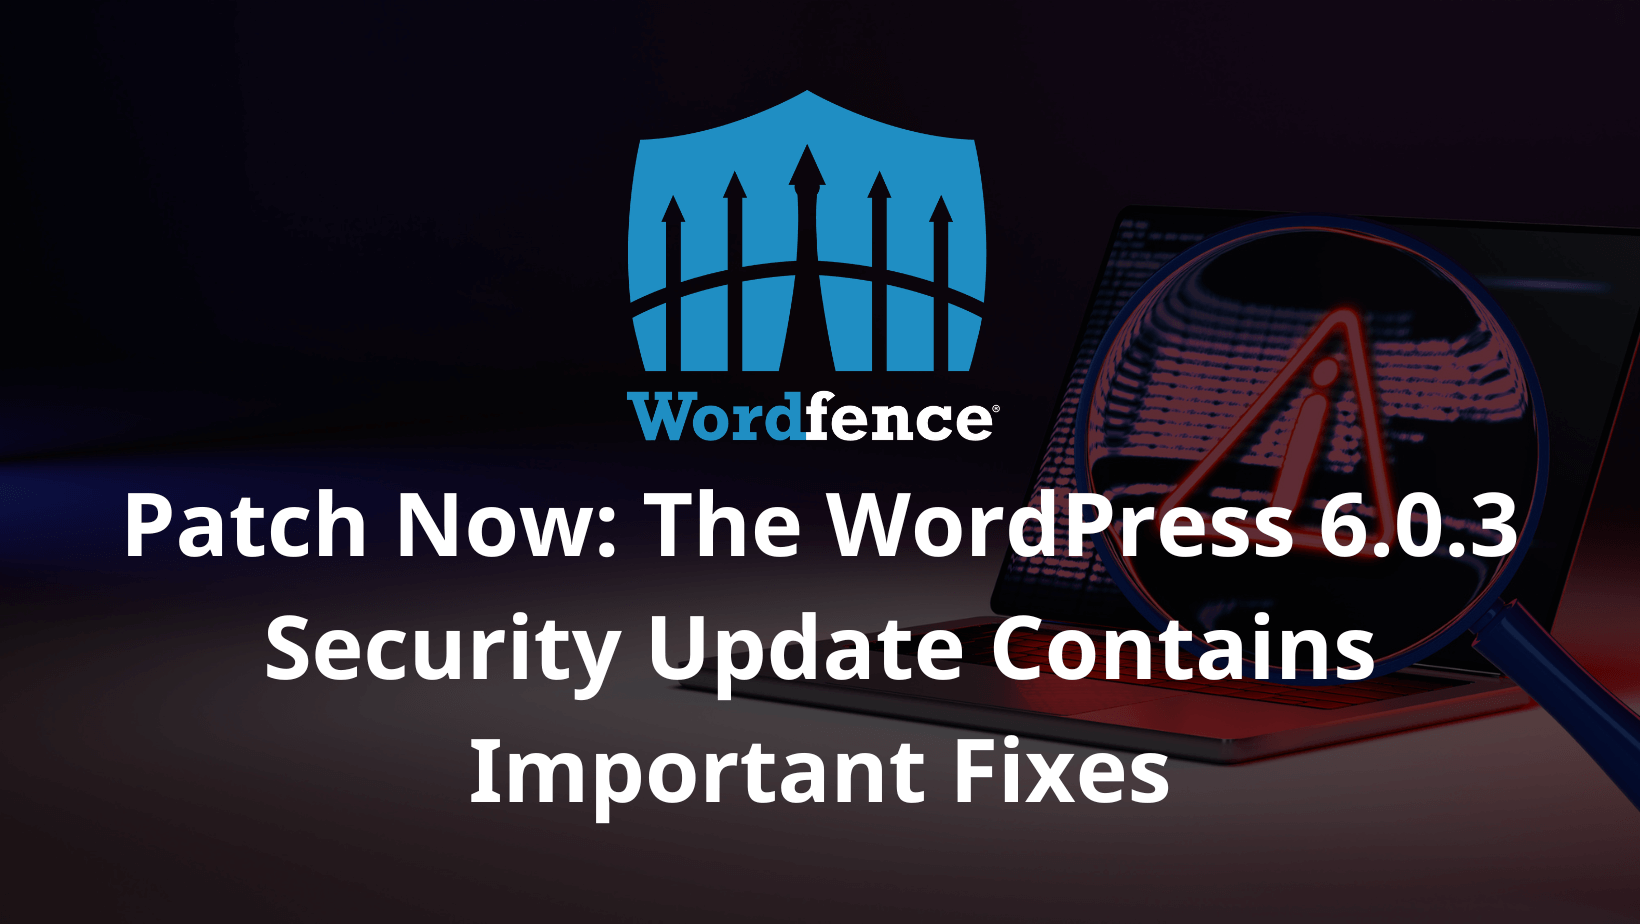 Patch Now The WordPress 6.0.3 Security Update Contains Important Fixes